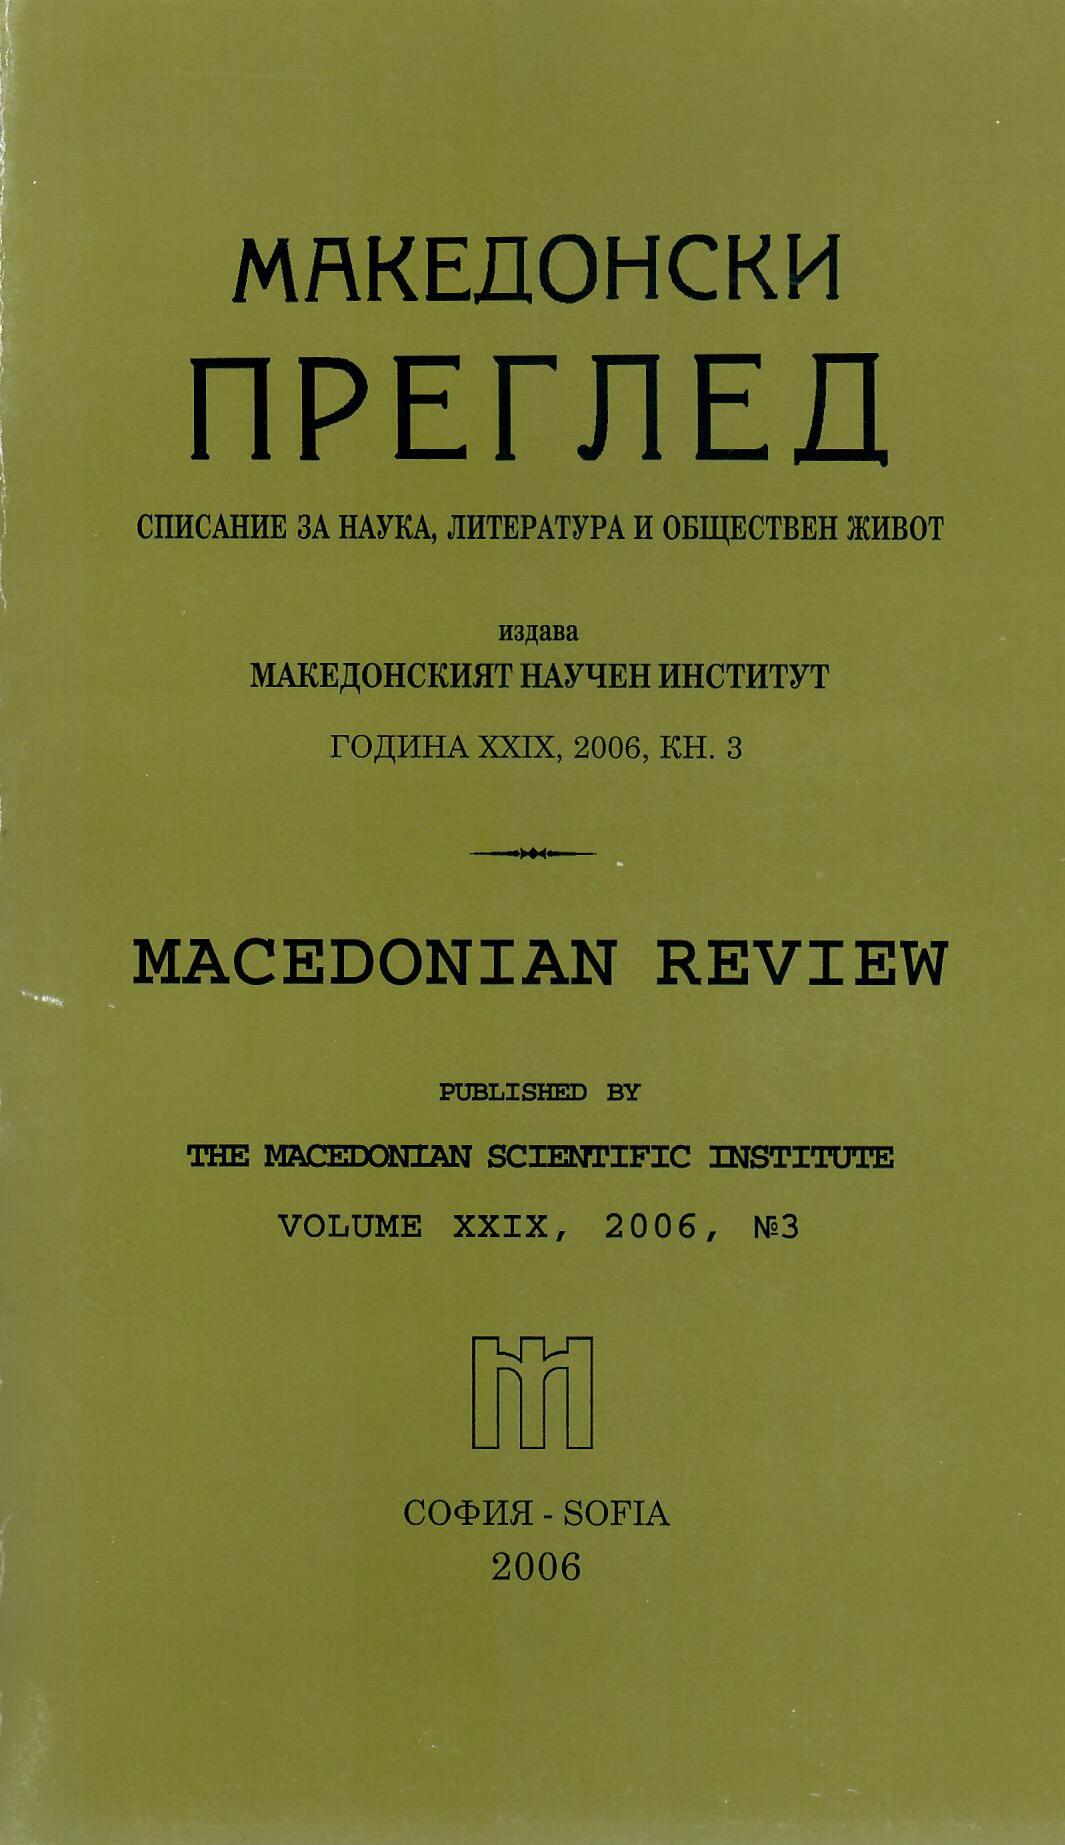 General meeting of the Macedonian Research Institute - June 12th, 2006 Cover Image